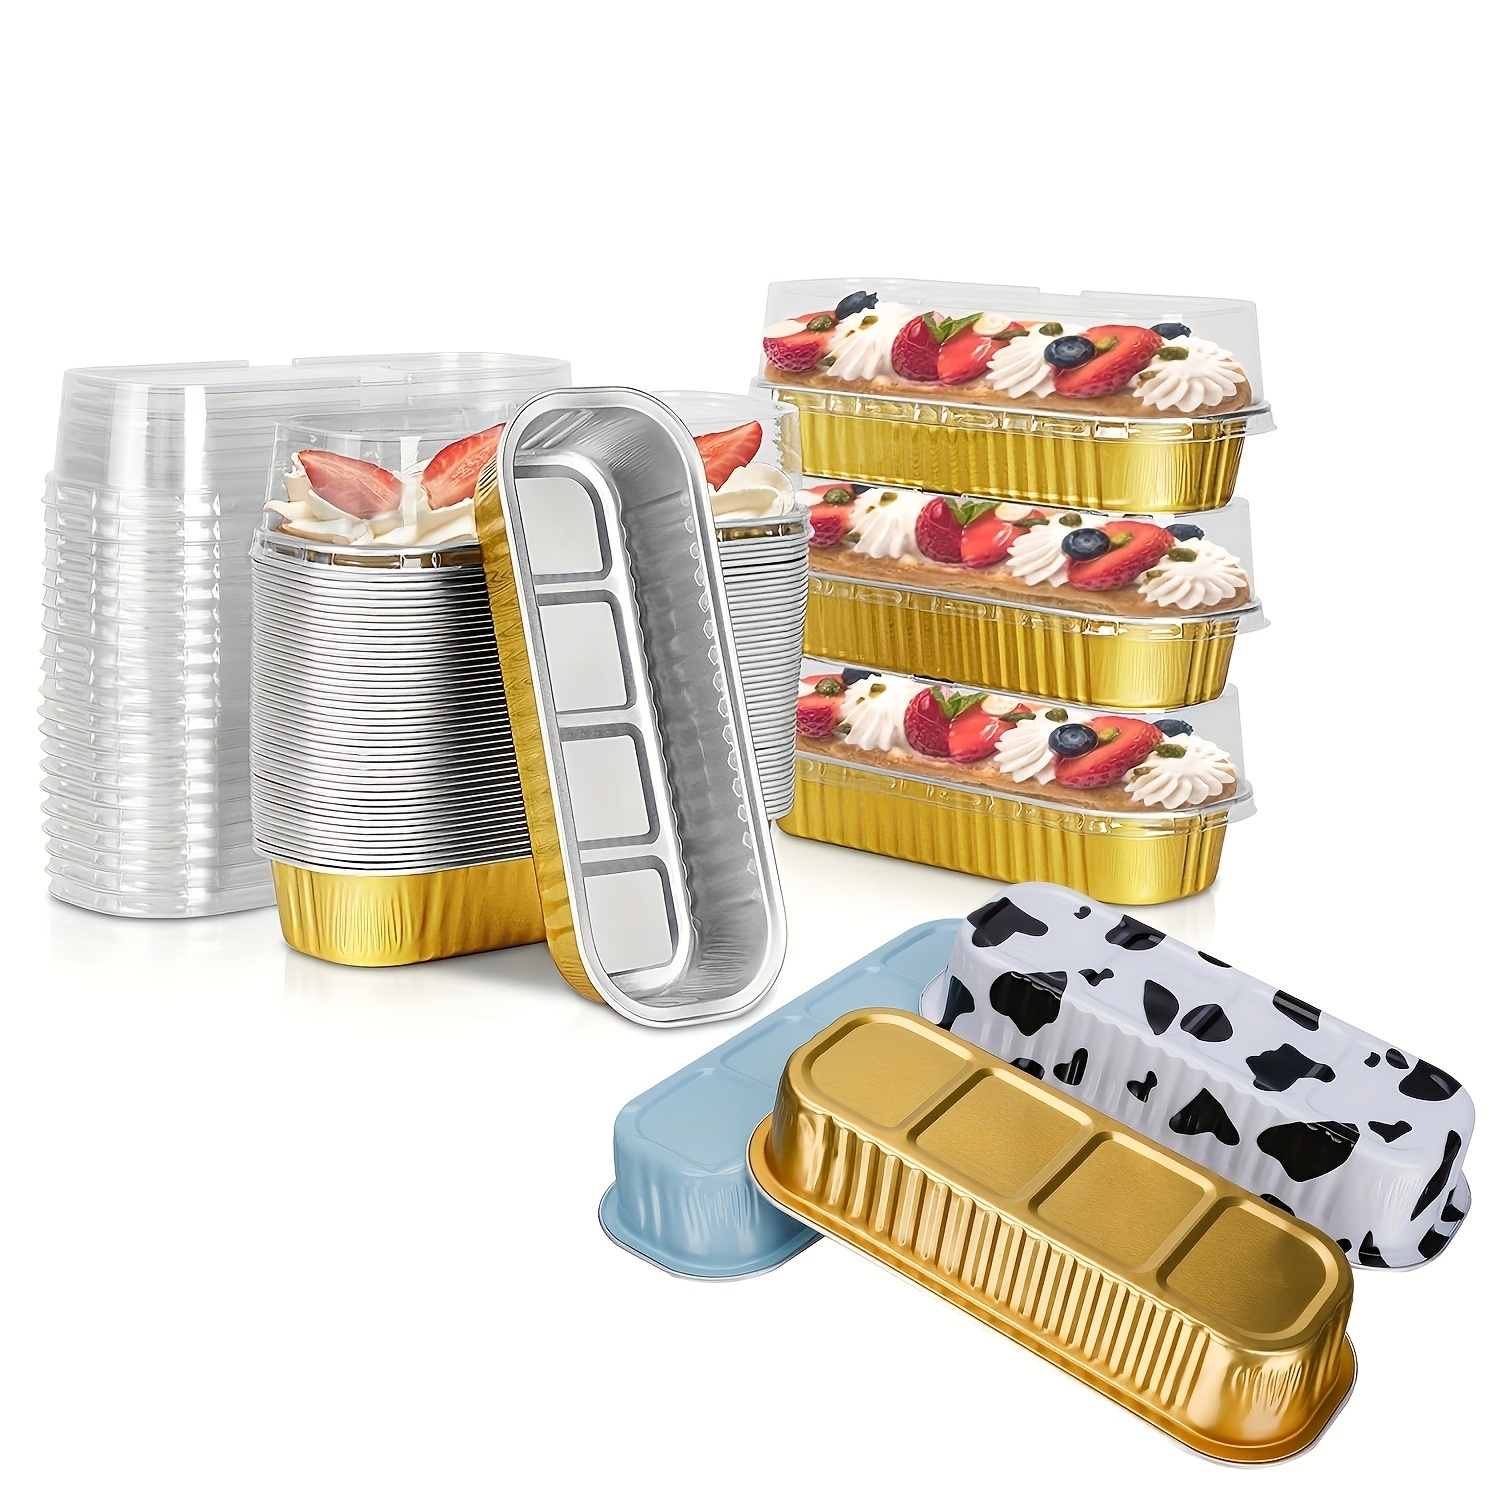 50PCS Christmas Cookie Tins with Lid, Foil Treat Containers for